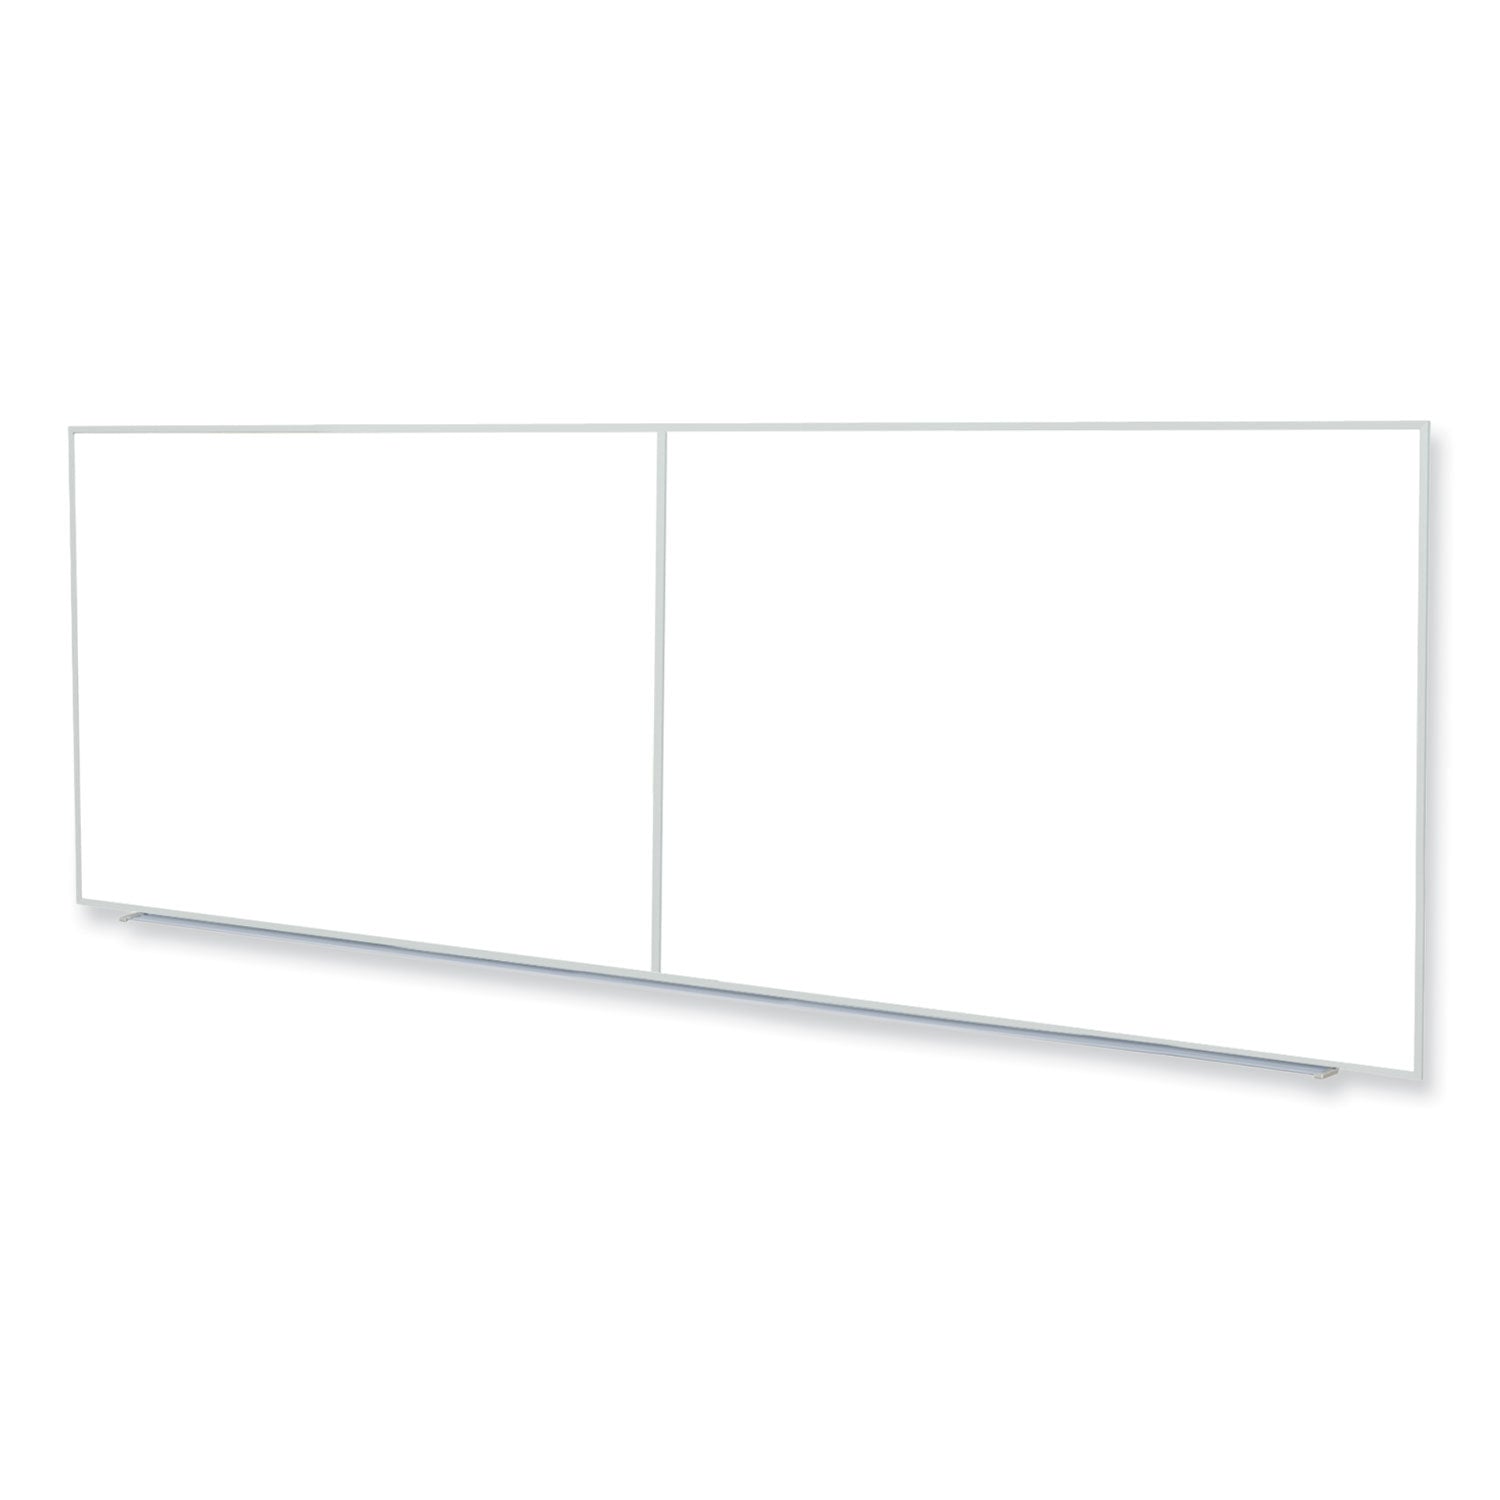 non-magnetic-whiteboard-with-aluminum-frame-14463-x-4847-white-surface-satin-aluminum-frame-ships-in-7-10-business-days_ghem24124 - 2